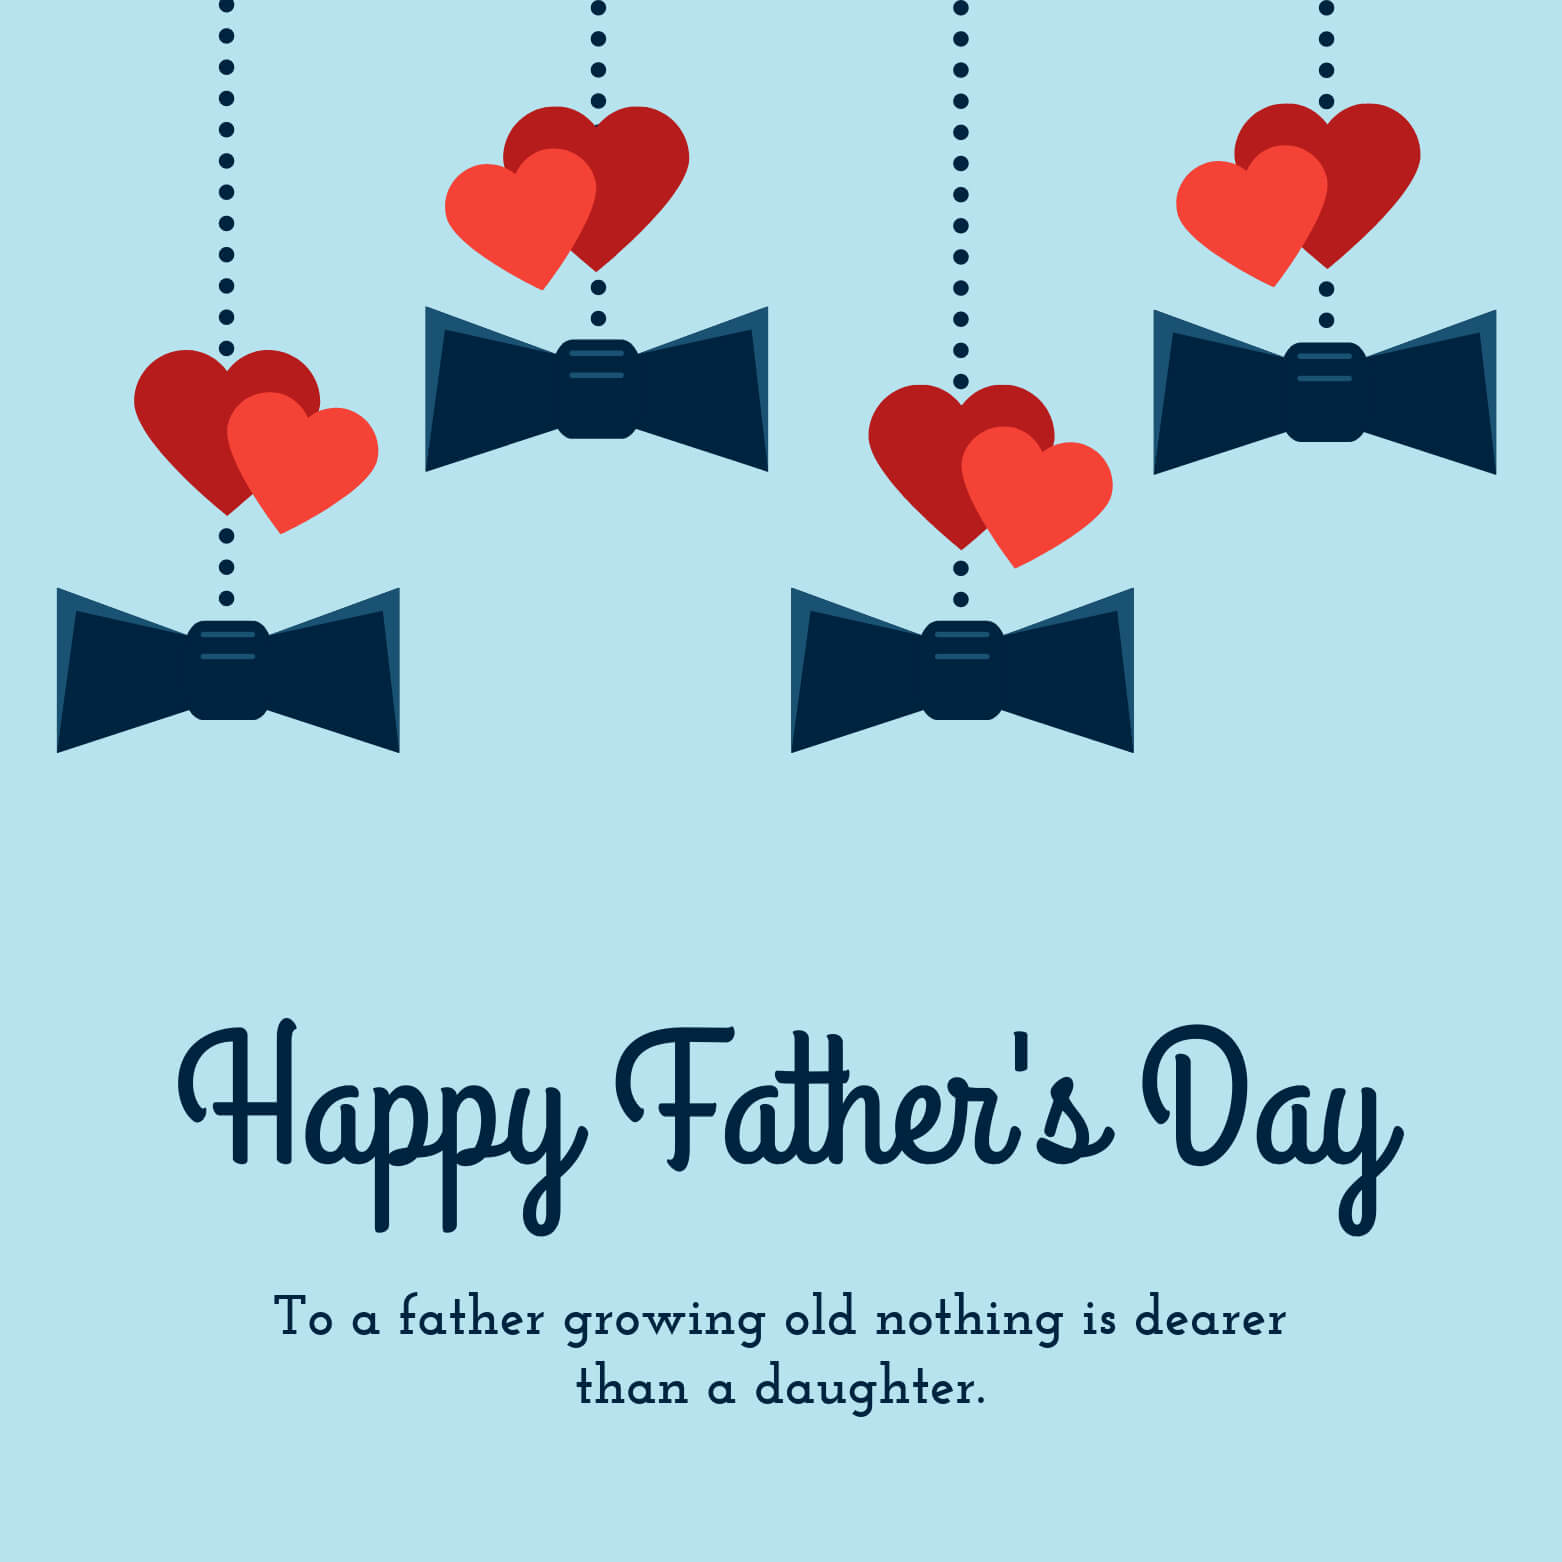 15+ Fun Father's Day Card Templates To Show Your Dad He's #1 With Fathers Day Card Template